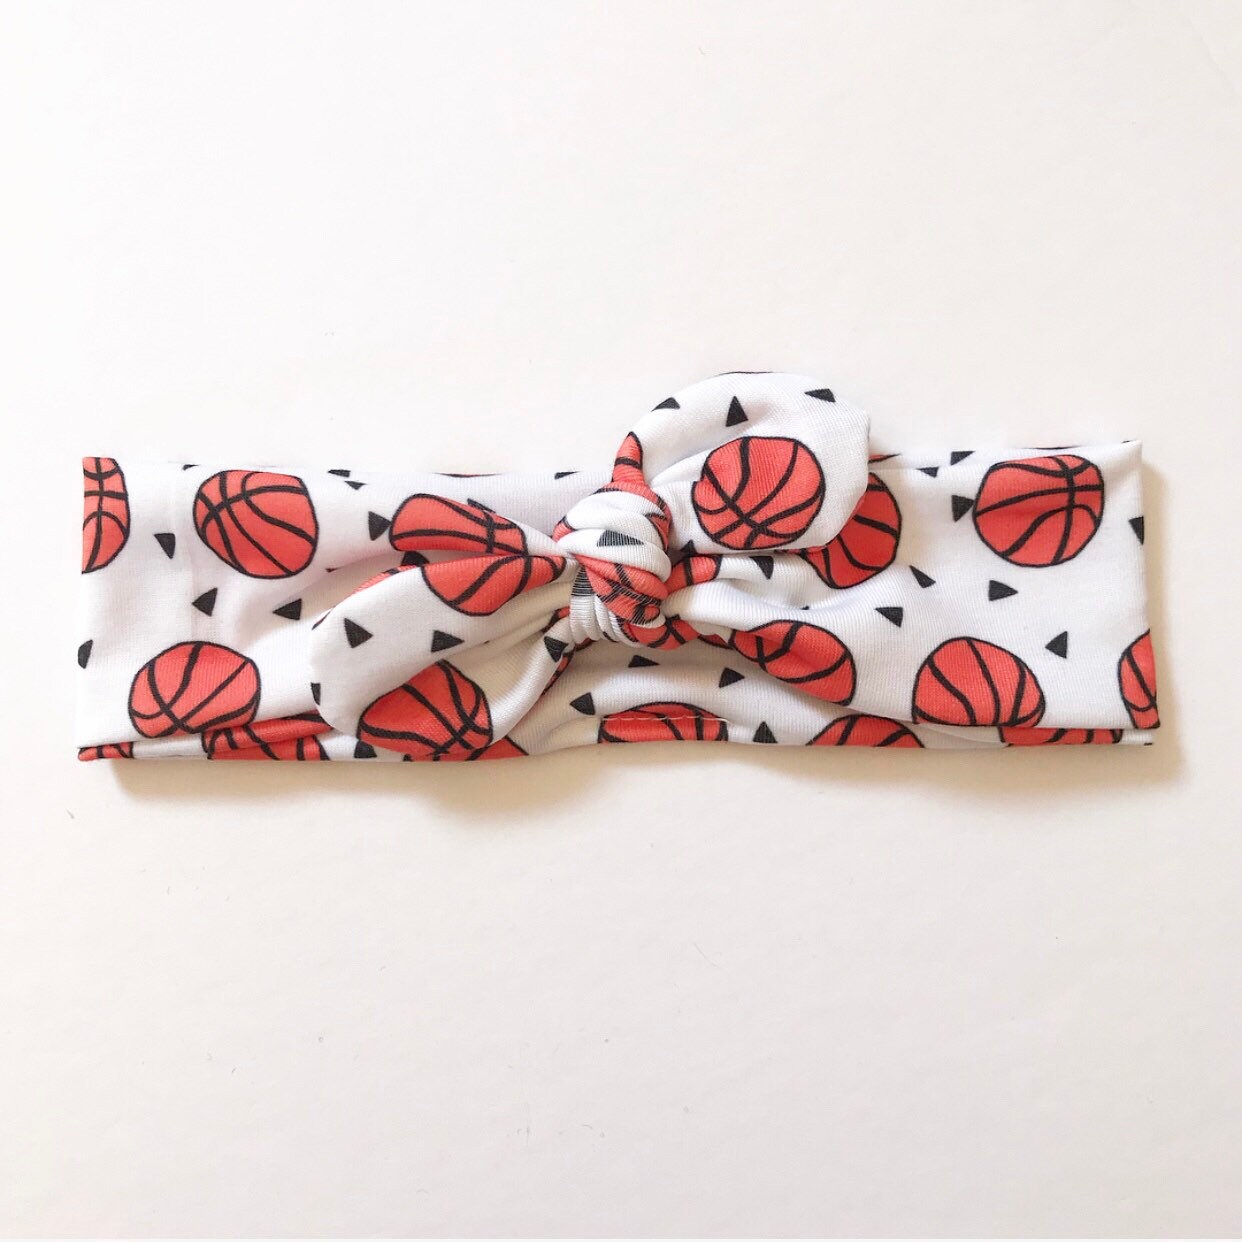 NBA Men's Hair Accessory - Red